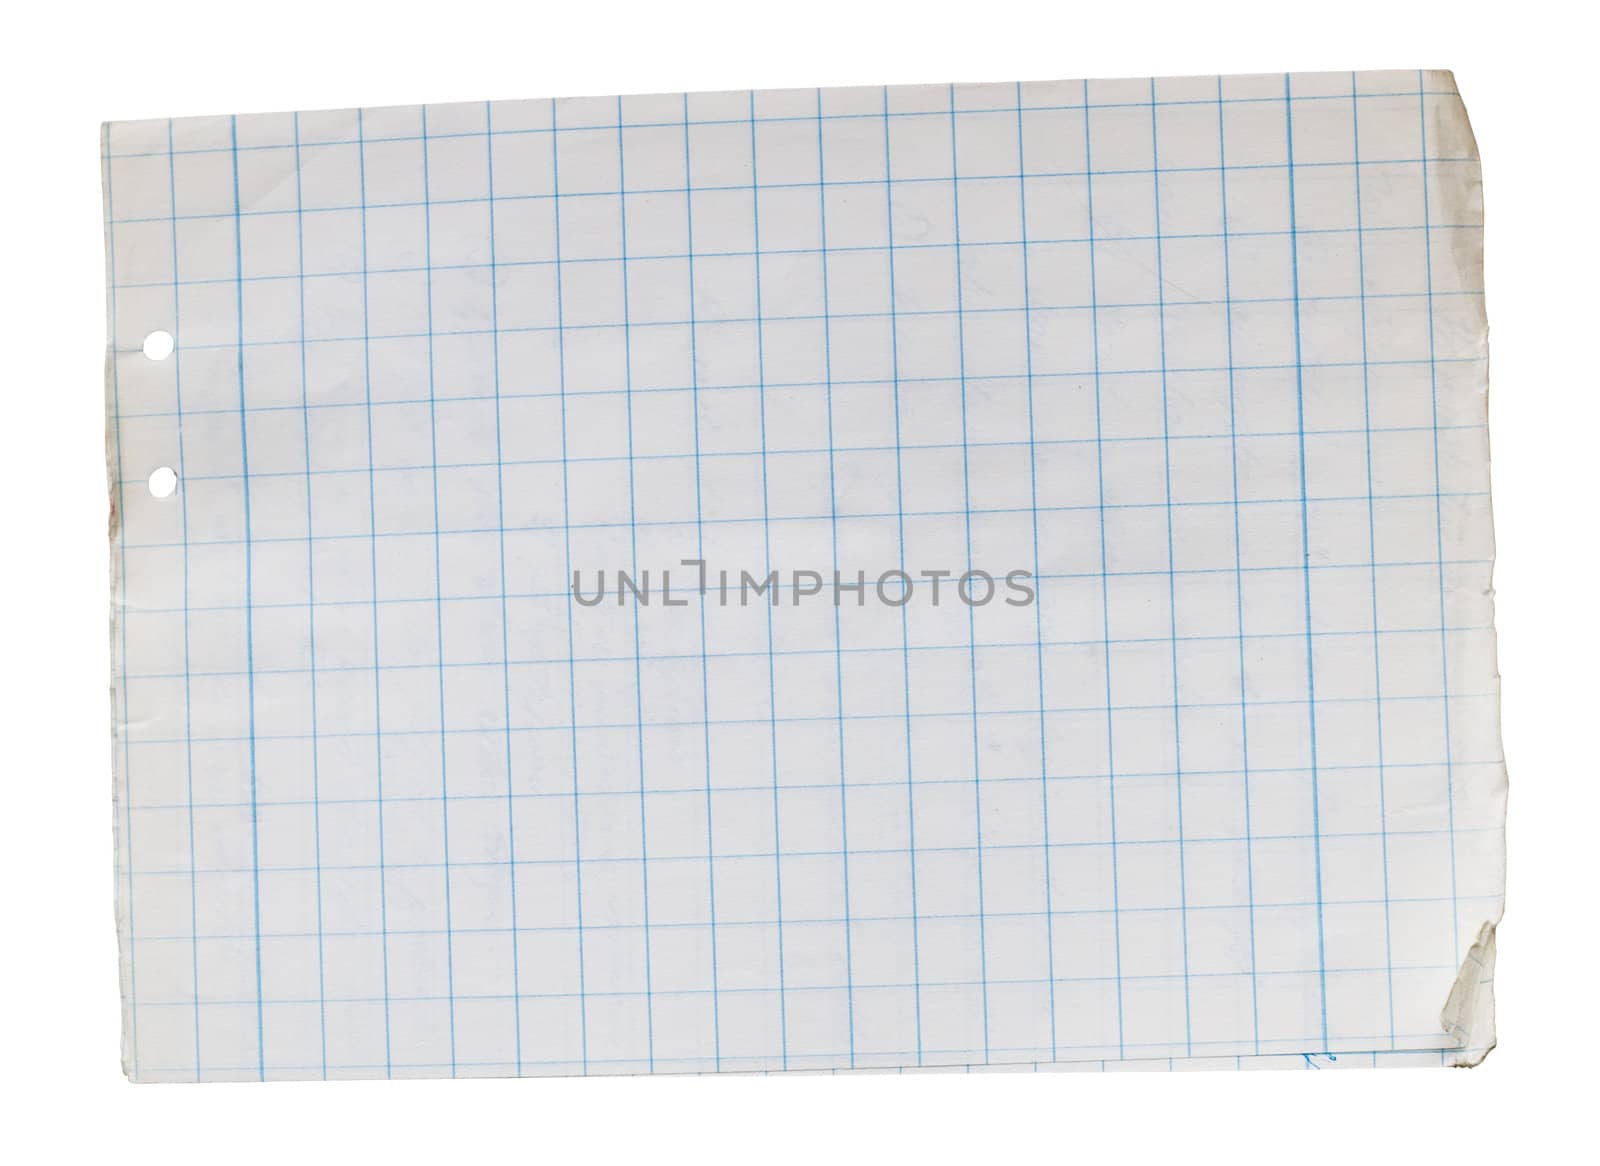 Stack of old lined papers from note book. Clipping path included to easy remove object shadow or replace background.